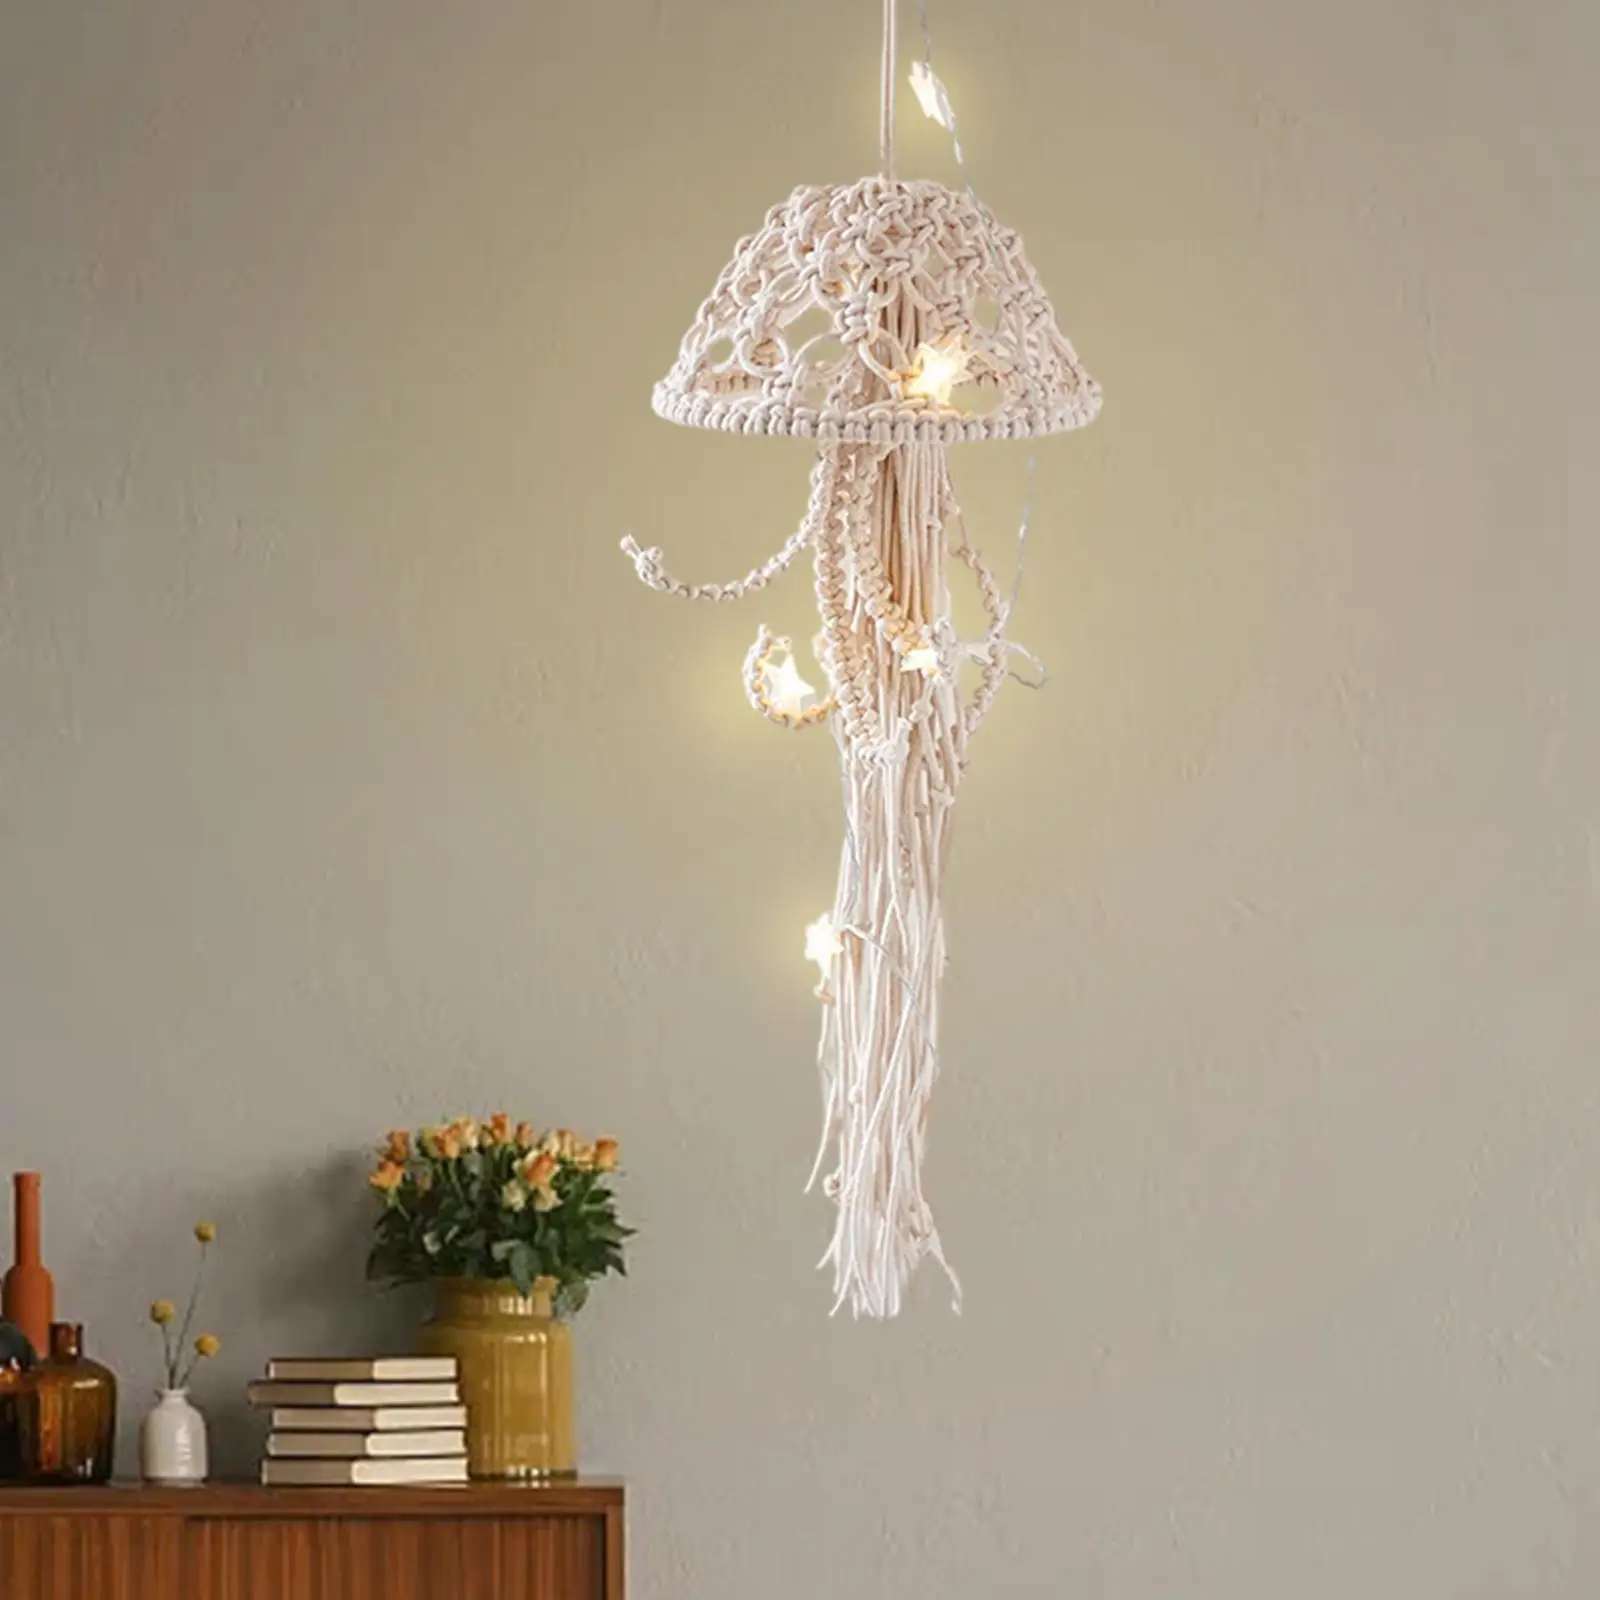 Nordic Jellyfish Wall Hanging Decor with Light String Wall Hanging Boho Tassels for Wedding Living Room Home Party Ornaments